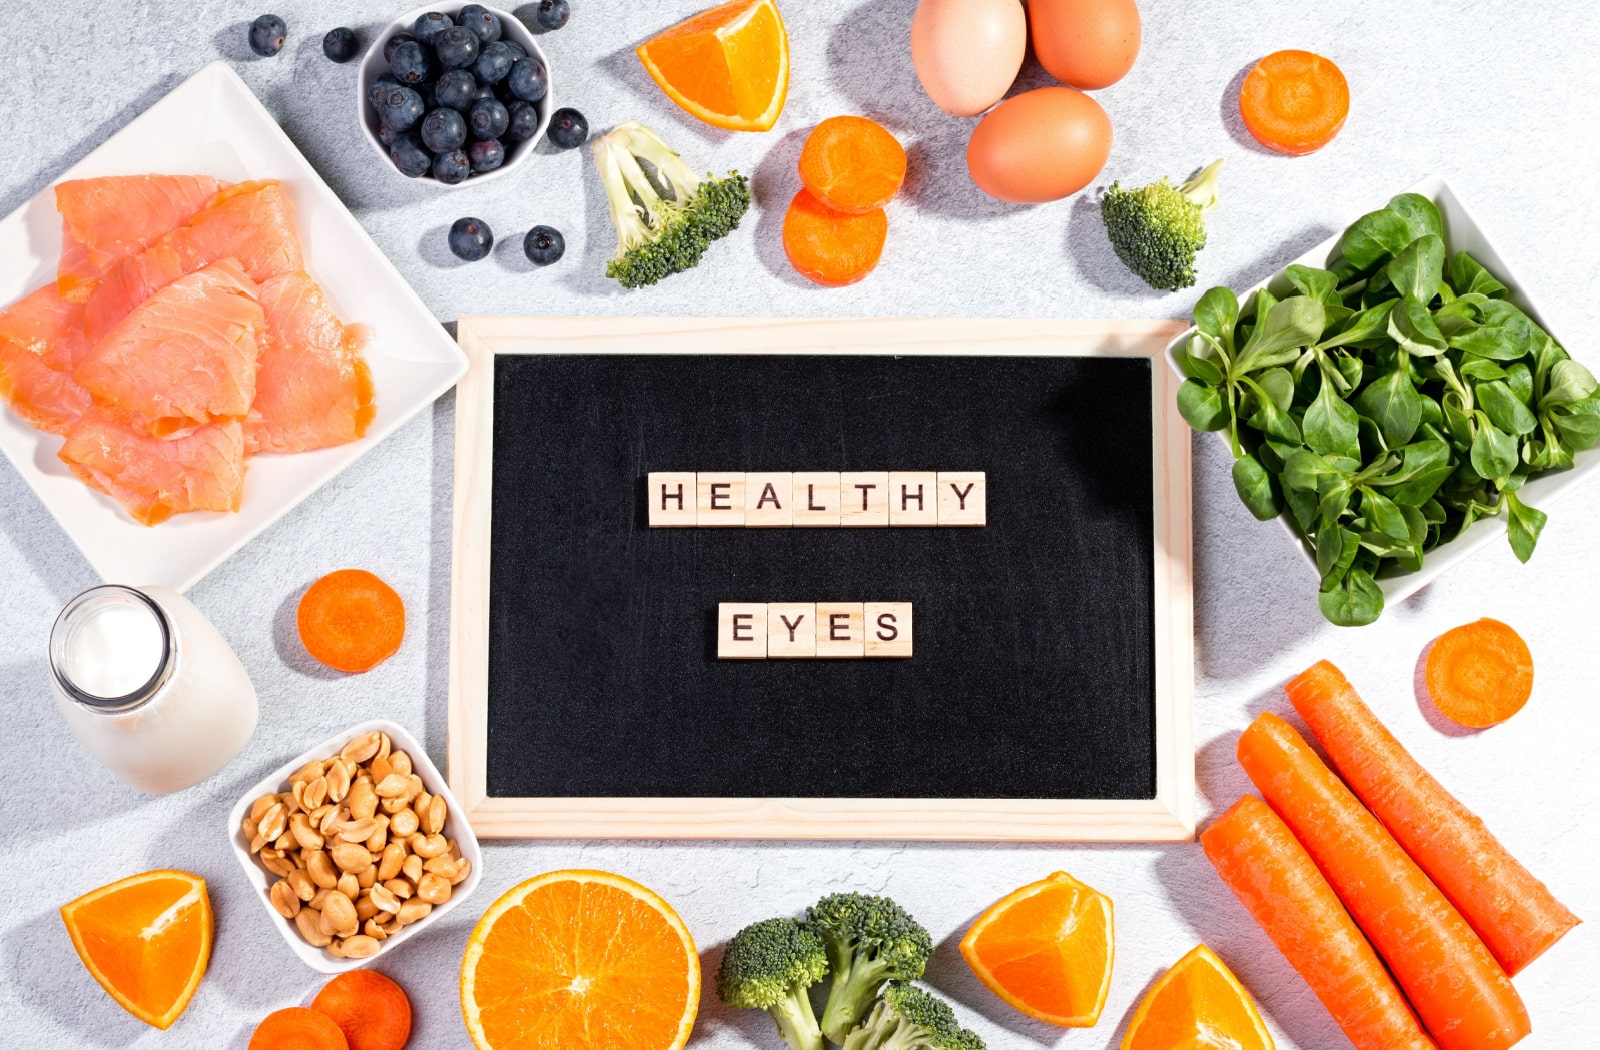 Assorted foods that help maintain eyes healthy, foods that are a good source of vitamins A, D, E, and Omega 3